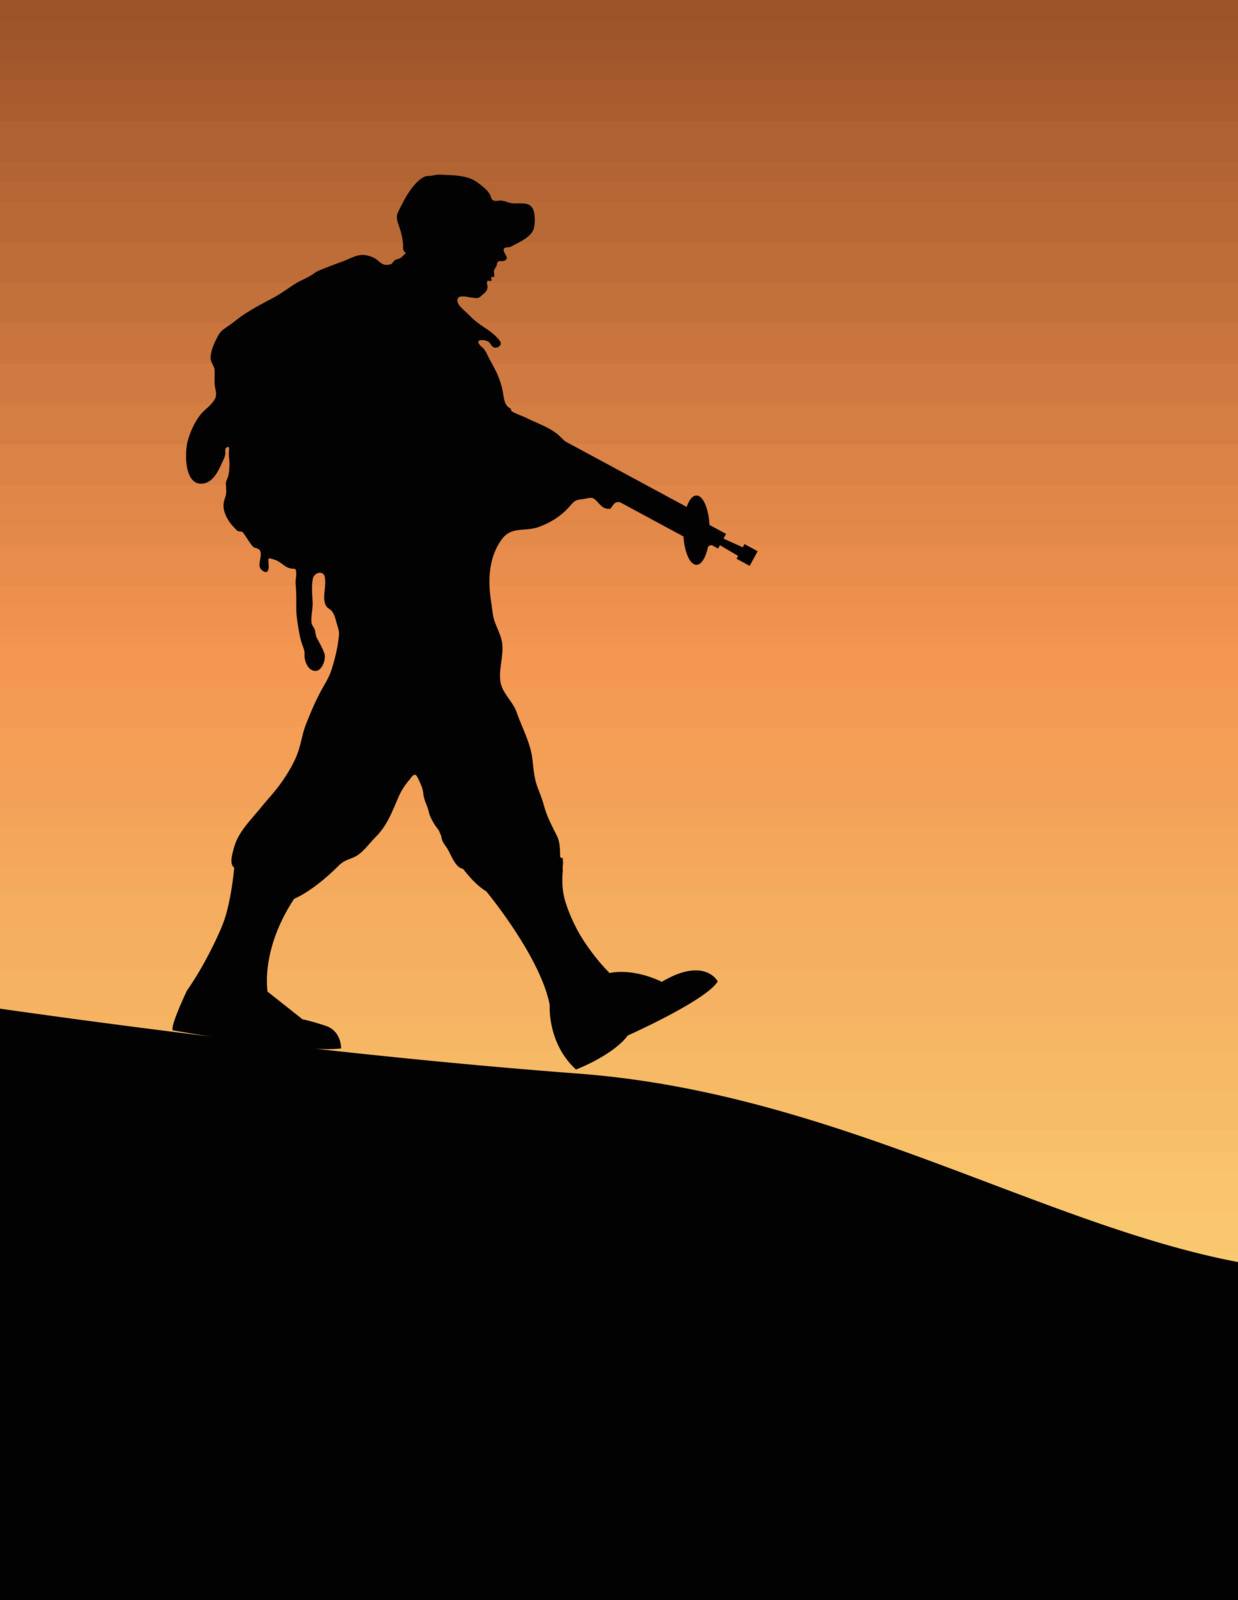 Silhouette of an army soldier walking on hills against sunset